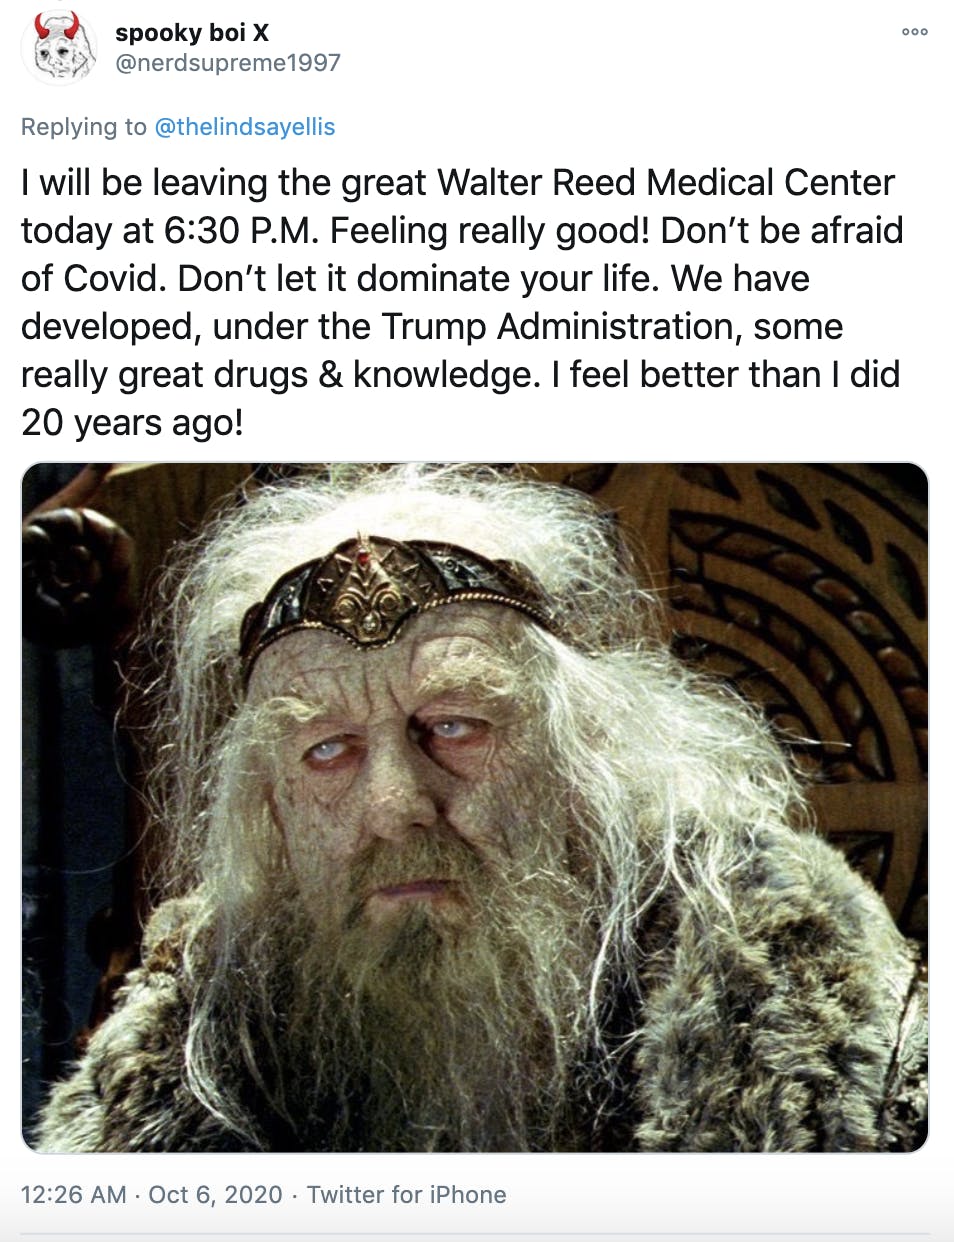 "I will be leaving the great Walter Reed Medical Center today at 6:30 P.M. Feeling really good! Don’t be afraid of Covid. Don’t let it dominate your life. We have developed, under the Trump Administration, some really great drugs & knowledge. I feel better than I did 20 years ago!" Screengrab of Ill looking King of Gondor from Lord of the Rings